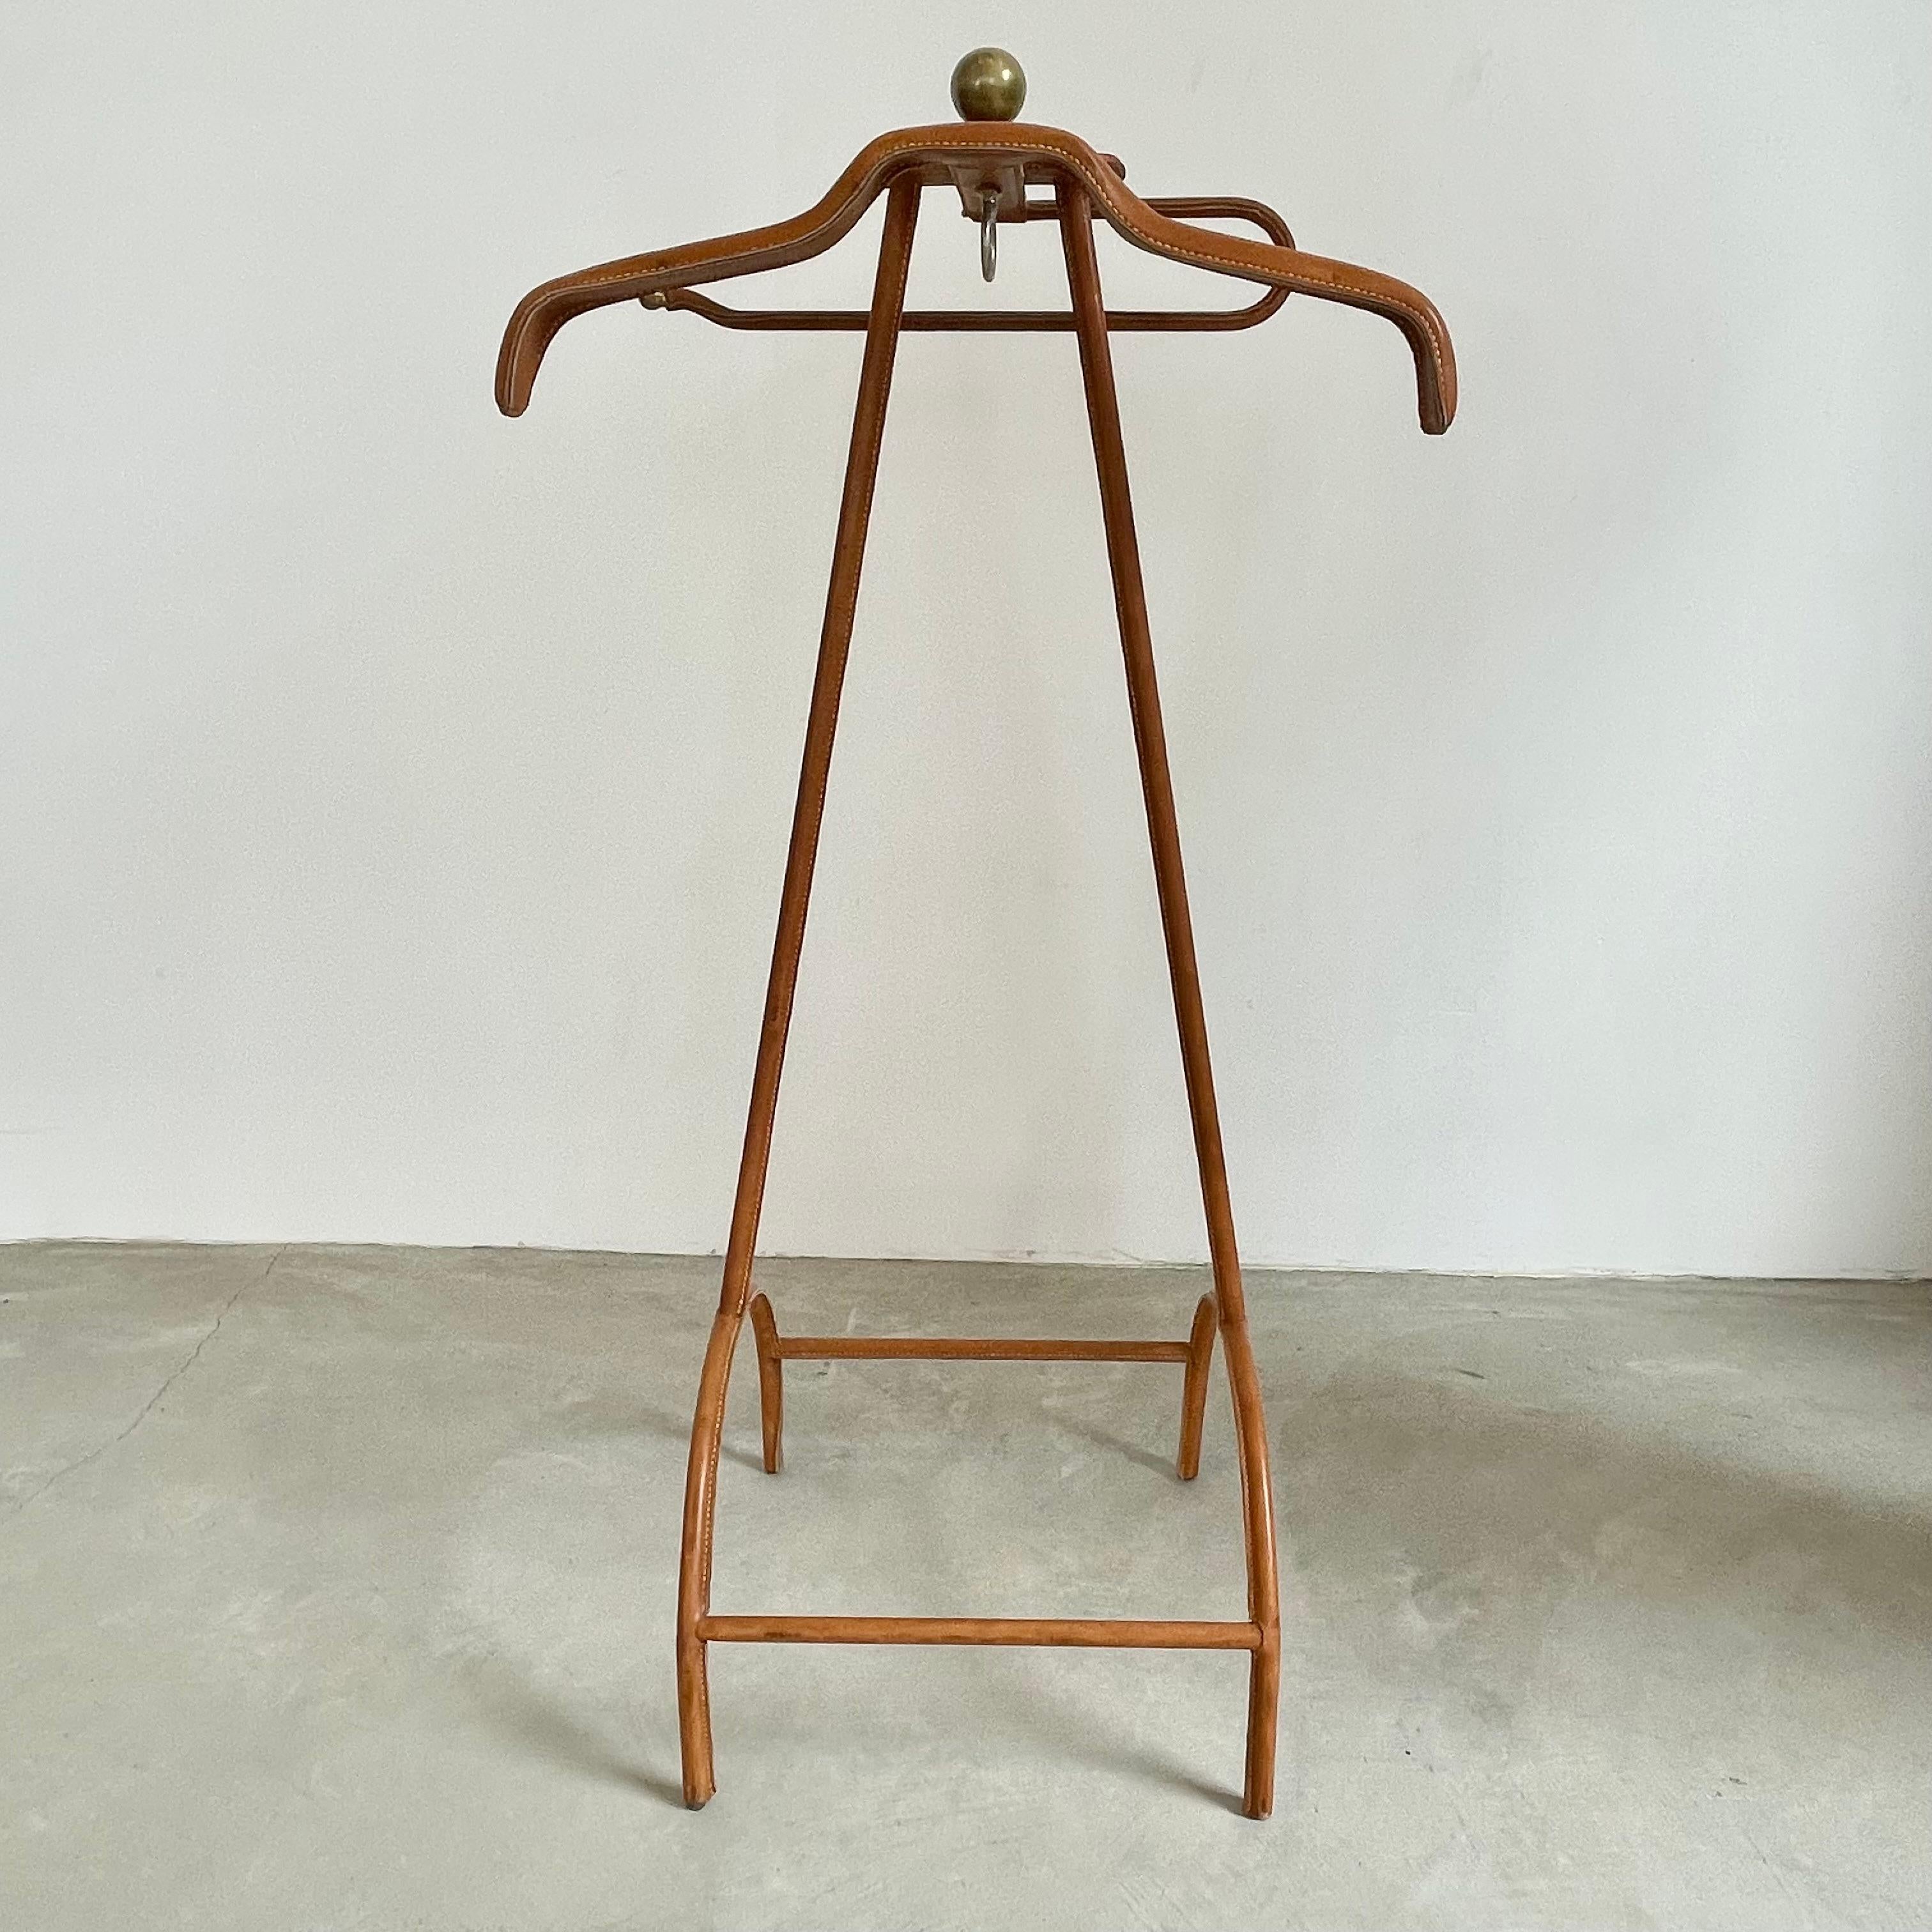 Stunning coat stand / valet by French modernist designer, Jacques Adnet. Valet has an iron frame with brass accents including brass ball feet, brass ball at the end of the pant rod and a large brass ball adorning the top of the valet. Entire frame